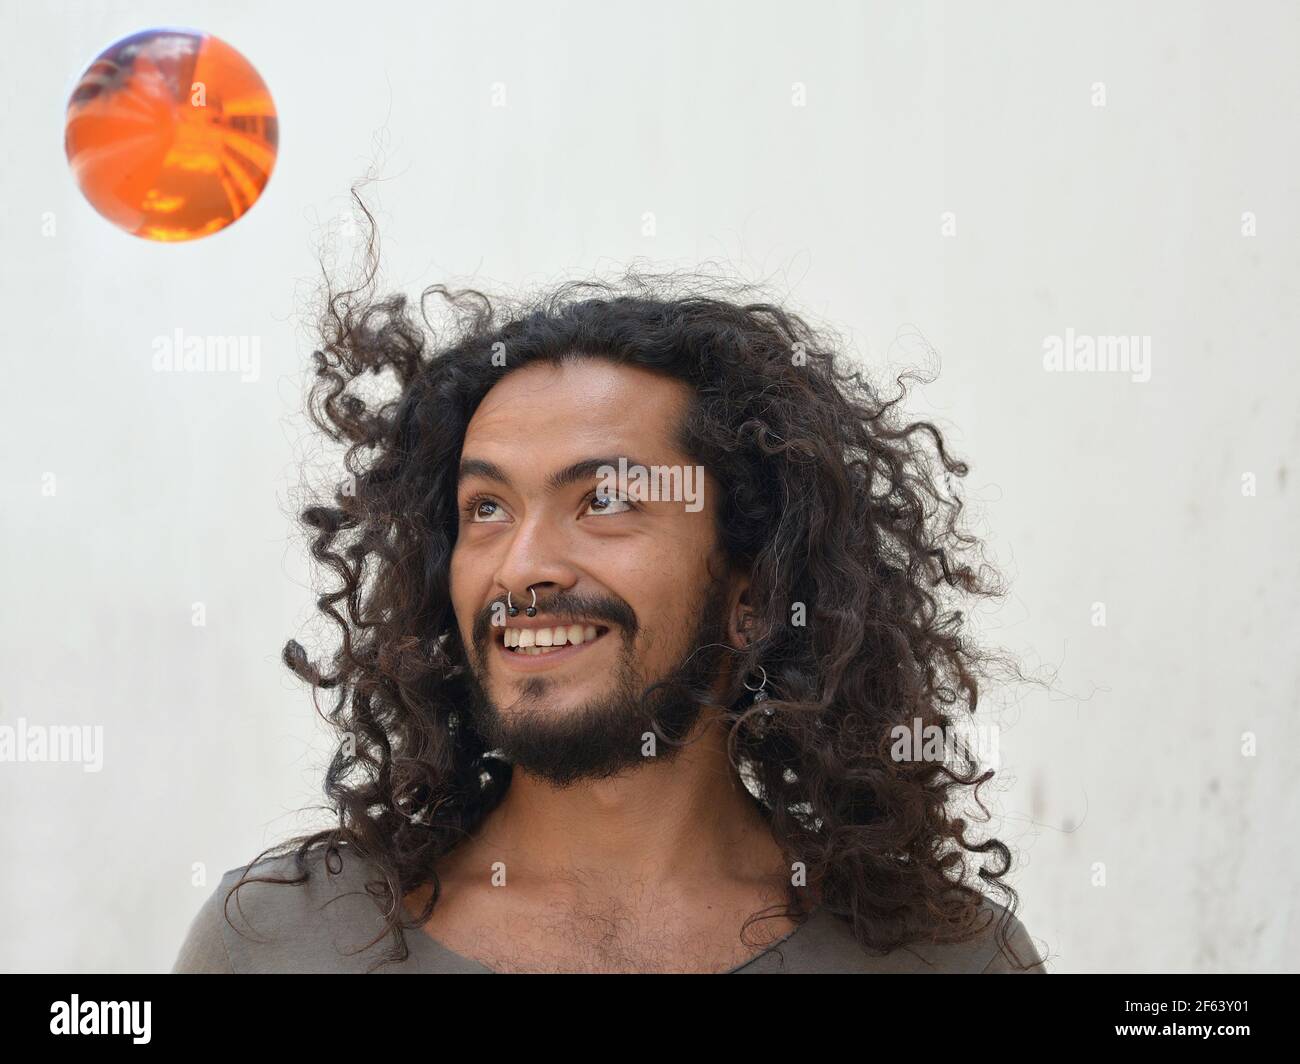 Joyful positive young Mexican man with long natural curls and septum nose jewelry plays cheerfully with an orange plastic ball. Stock Photo